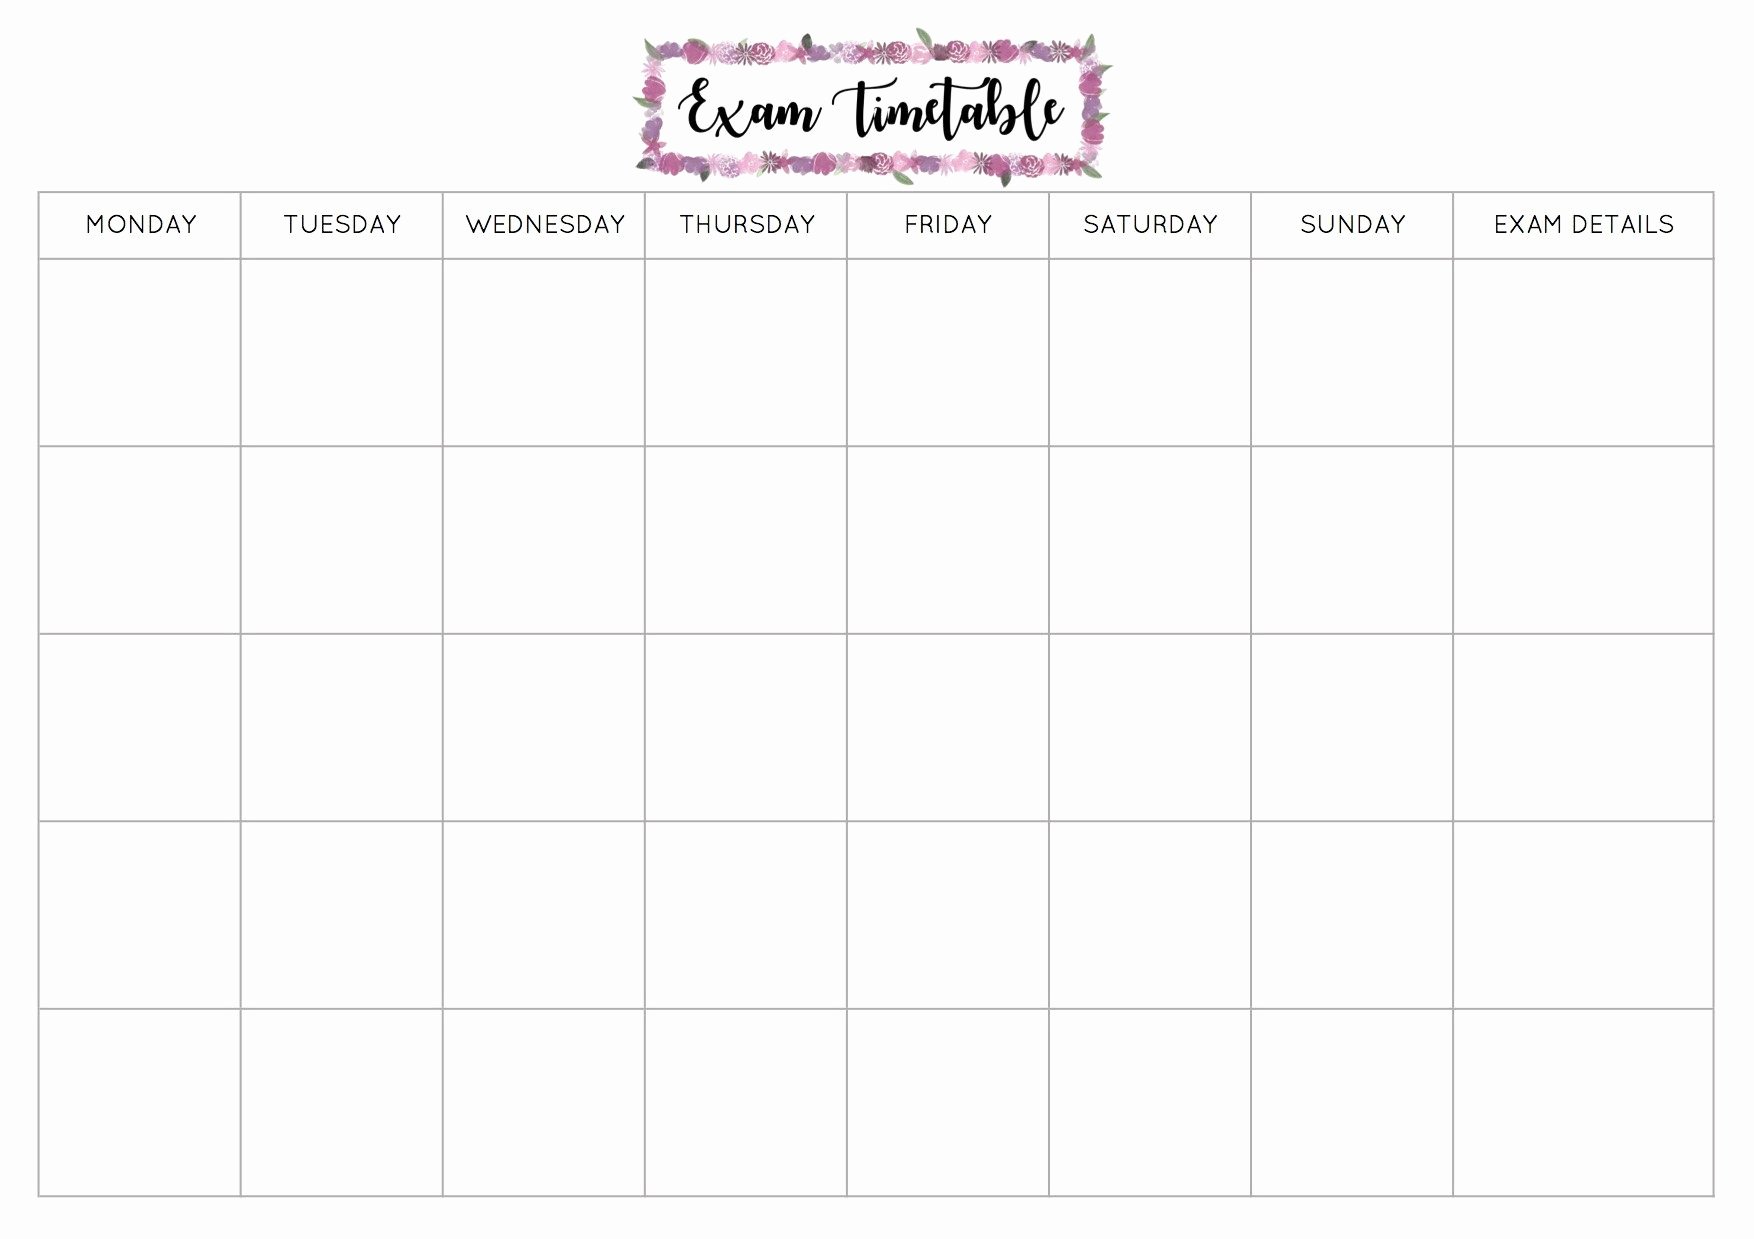 Weekly Study Schedule Template Unique Free Exam Timetable Printable – Emily Stu S